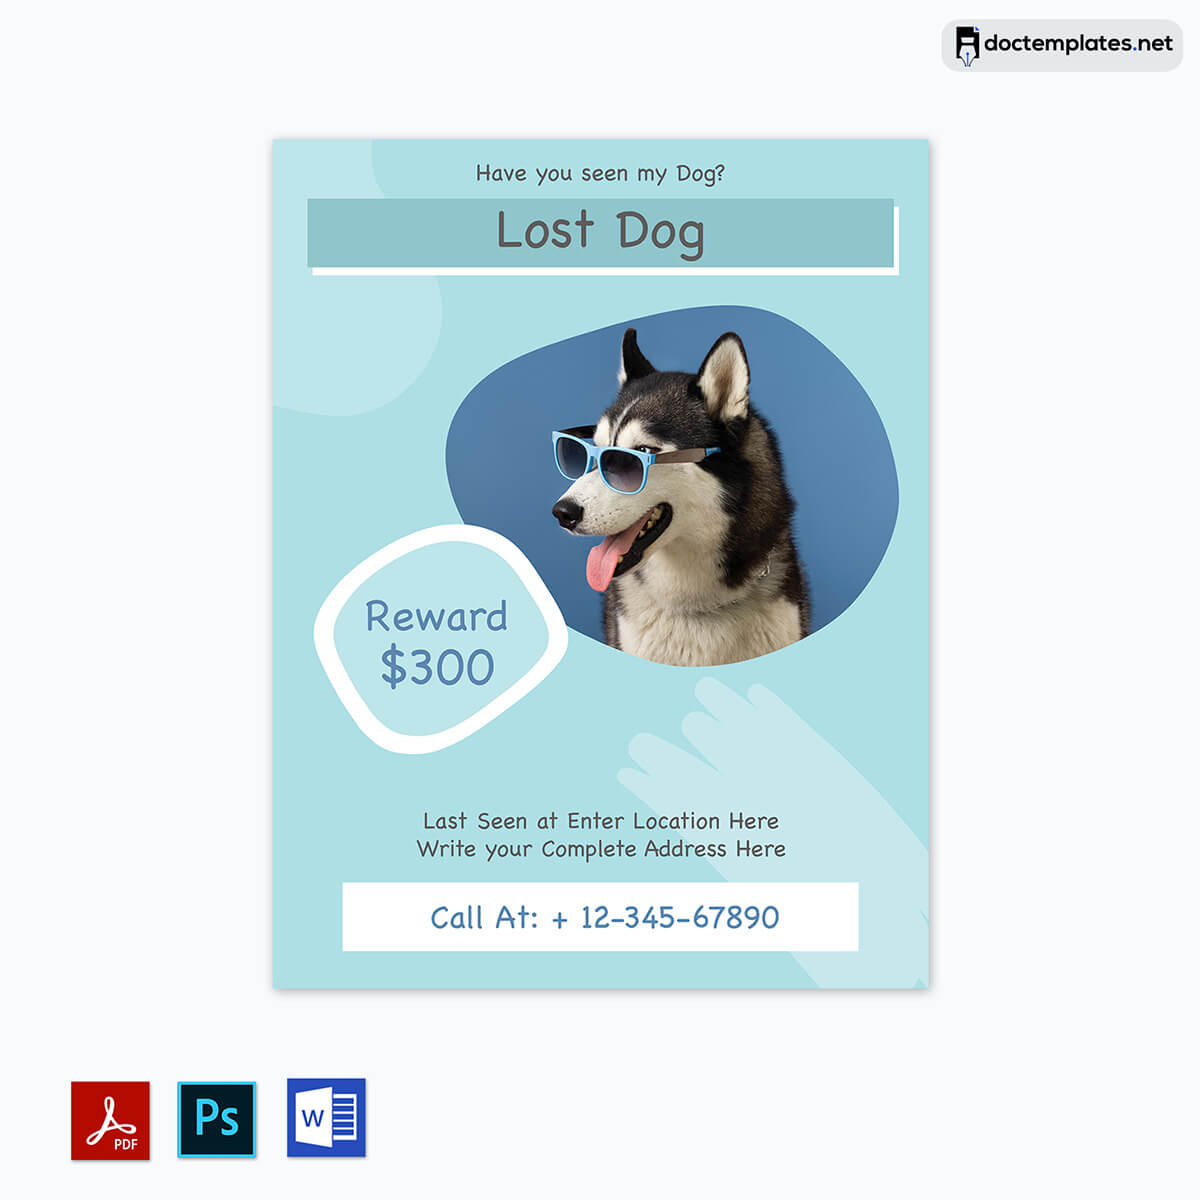 "Customizable Pet Finder Flyer" - Customize this template to create a flyer for finding lost cats and dogs.